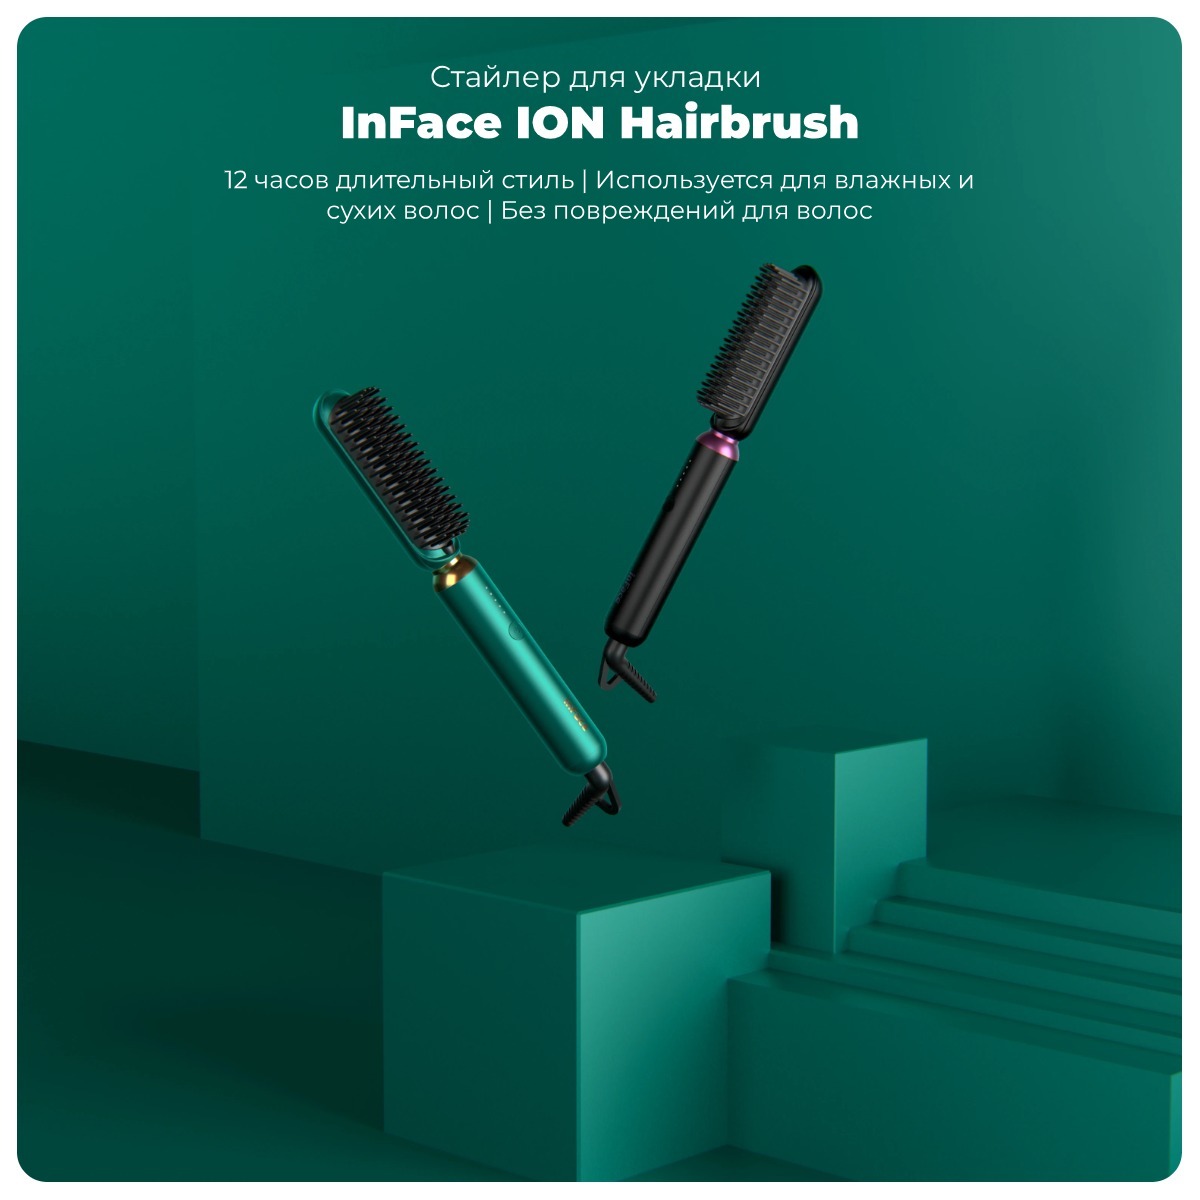 InFace-ION-Hairbrush-ZH-10D-01